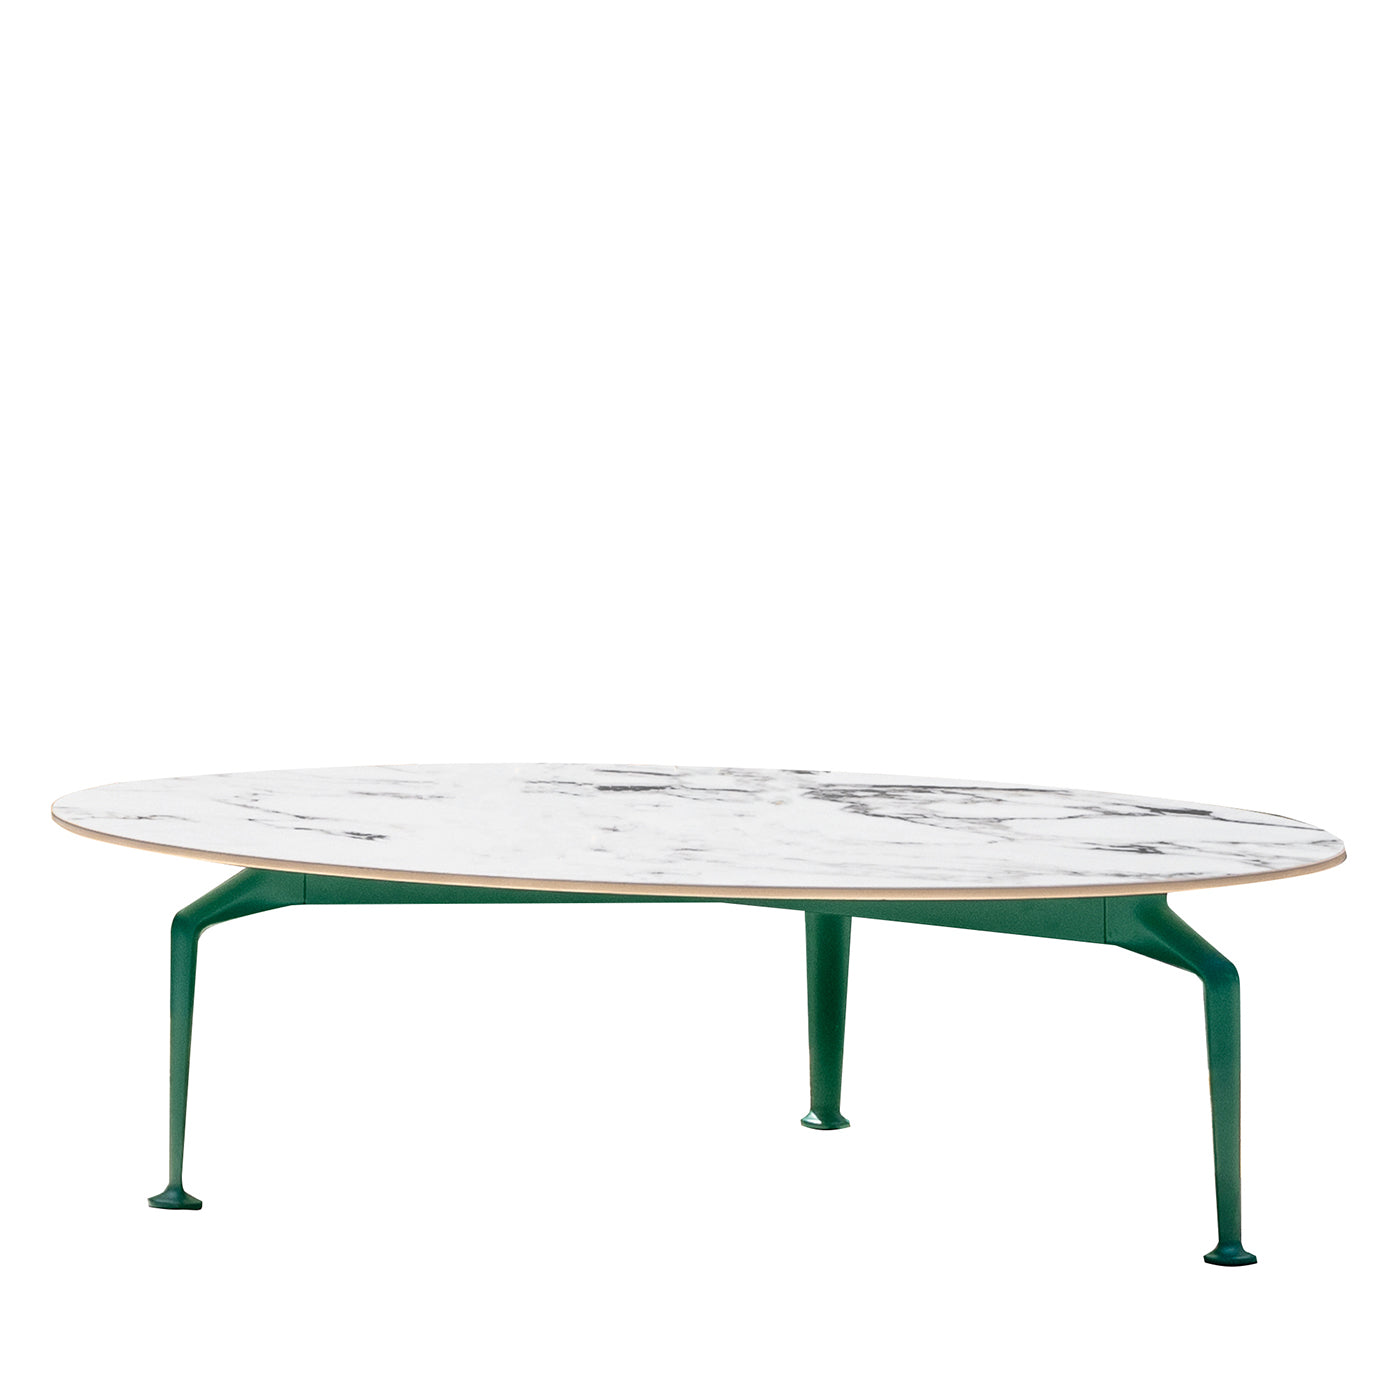 Cruise Alu Round Green Coffee Table by Ludovica & Roberto Palomba - Main view